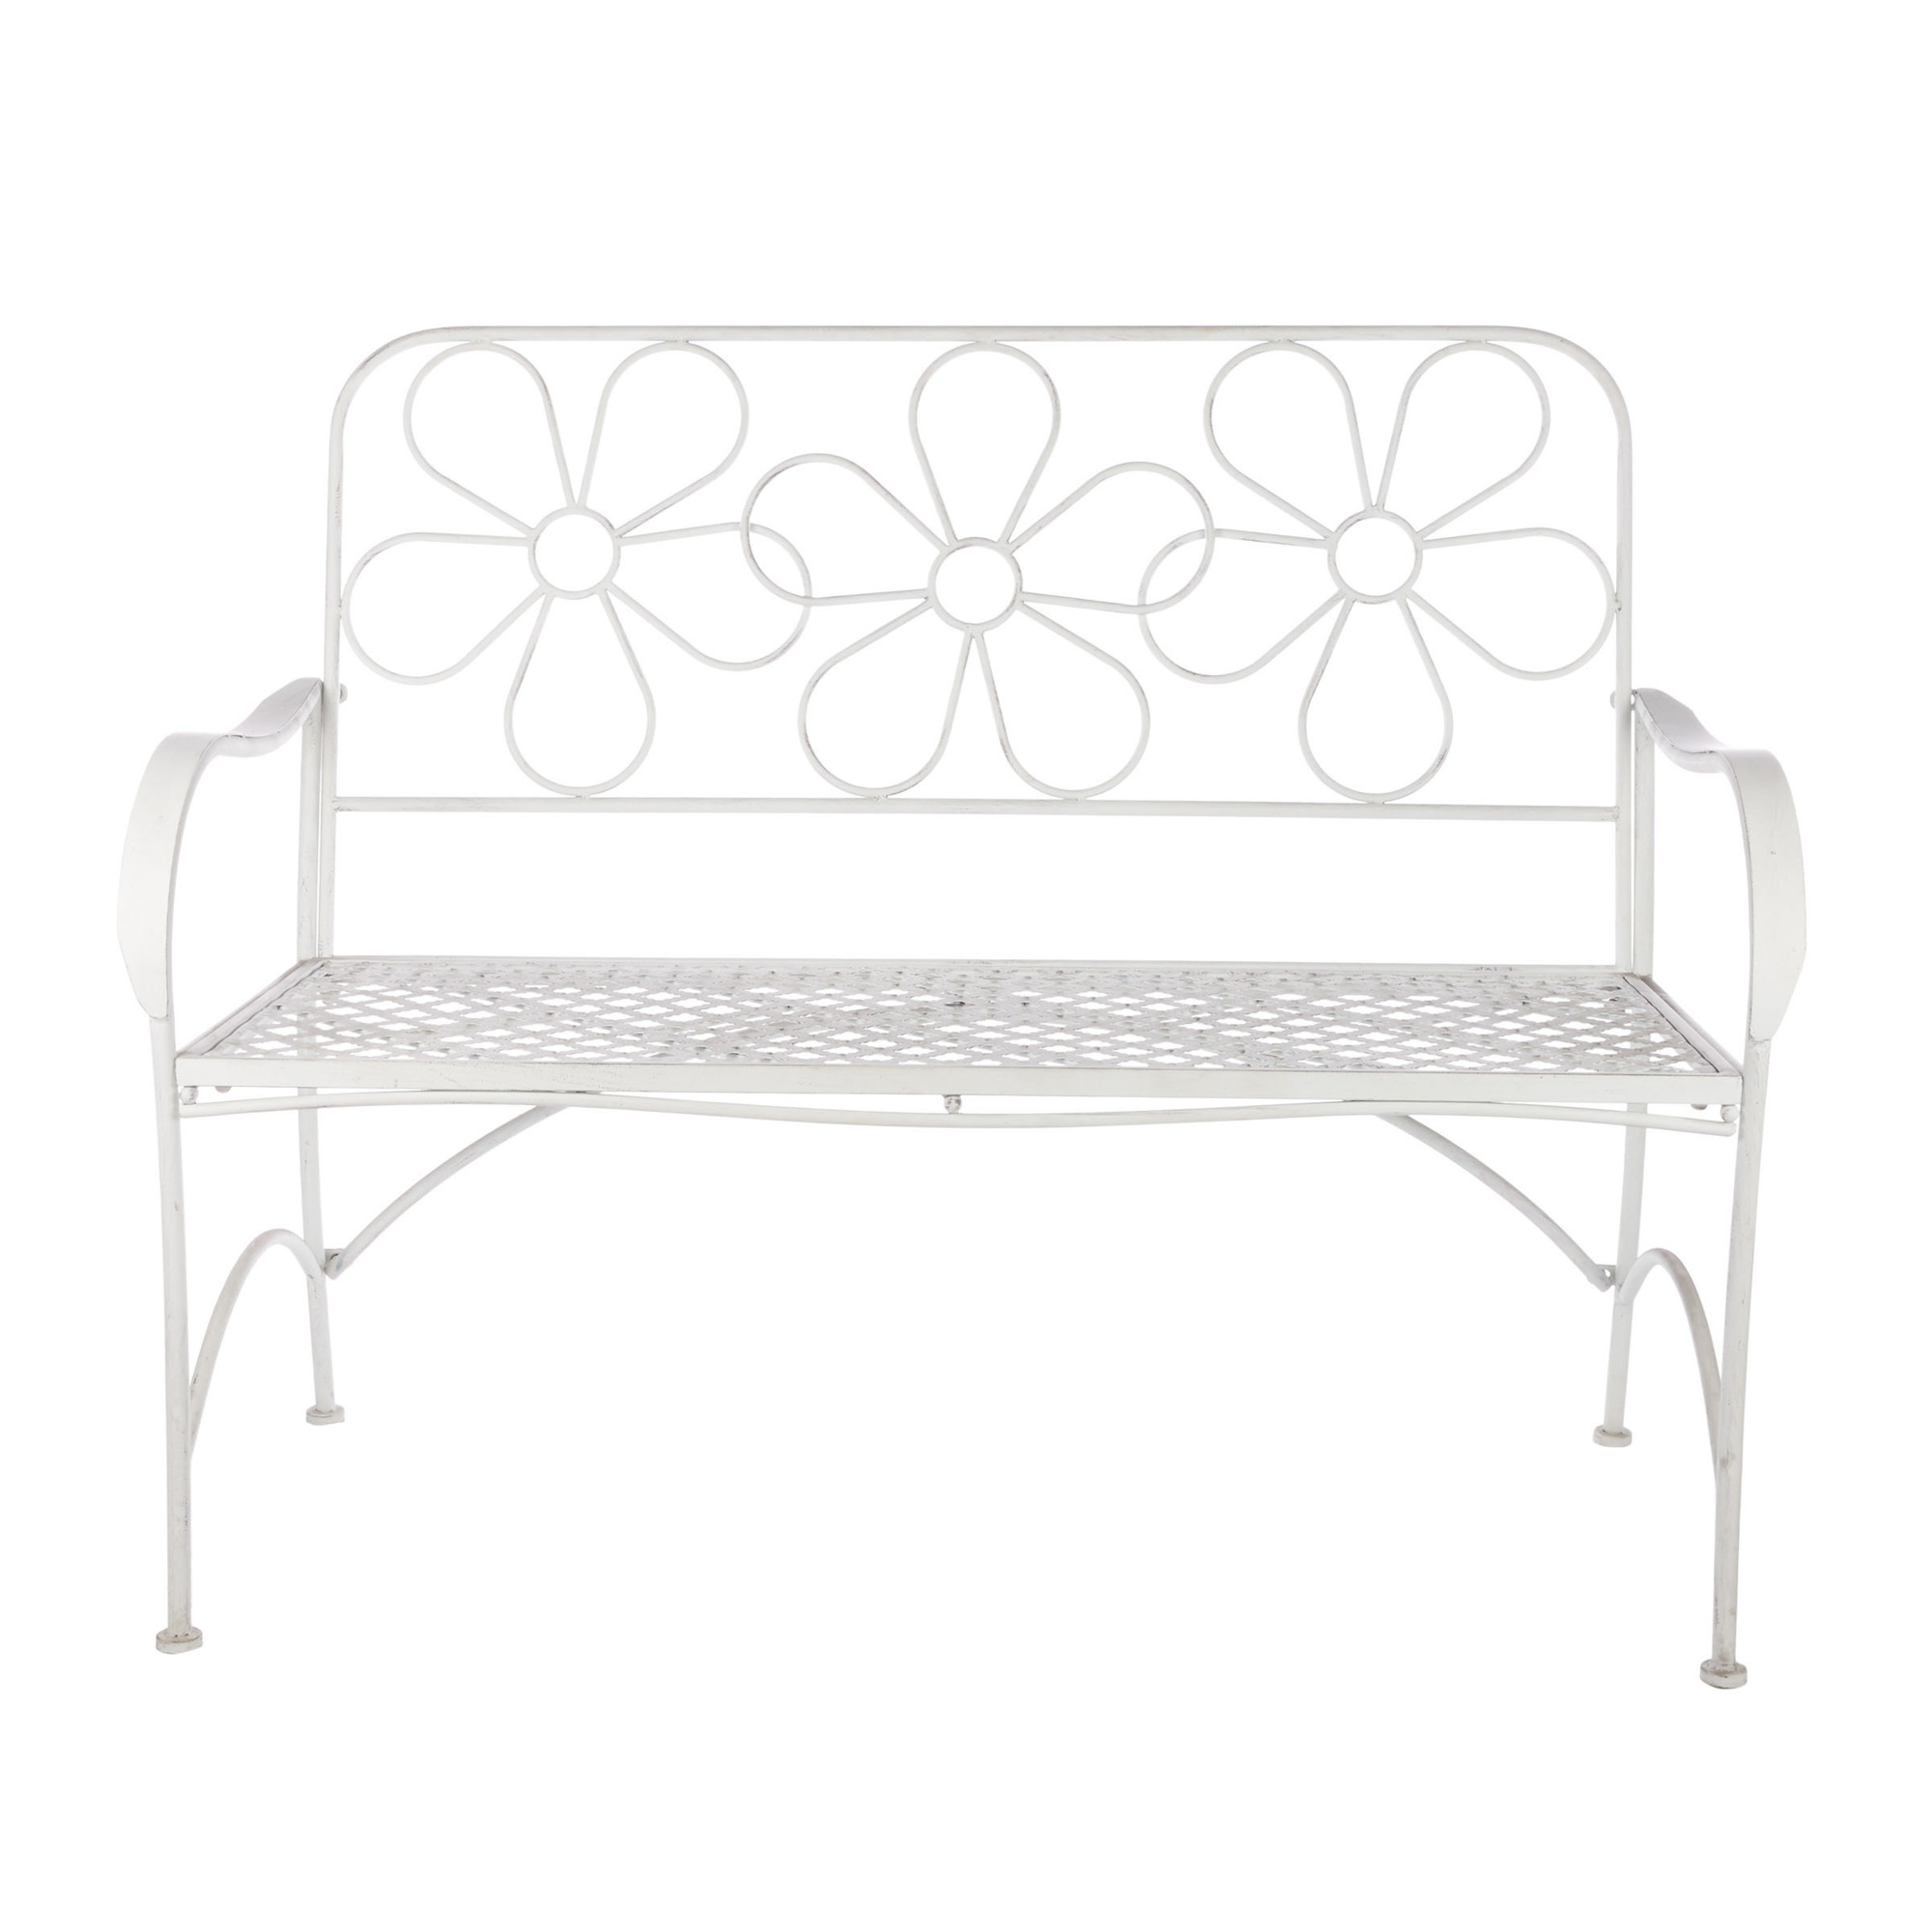 Alpine Corporation, White Daisy Metal Bench, Primary Color White, Material Multiple, Width 21 in, Model BAZ398WT